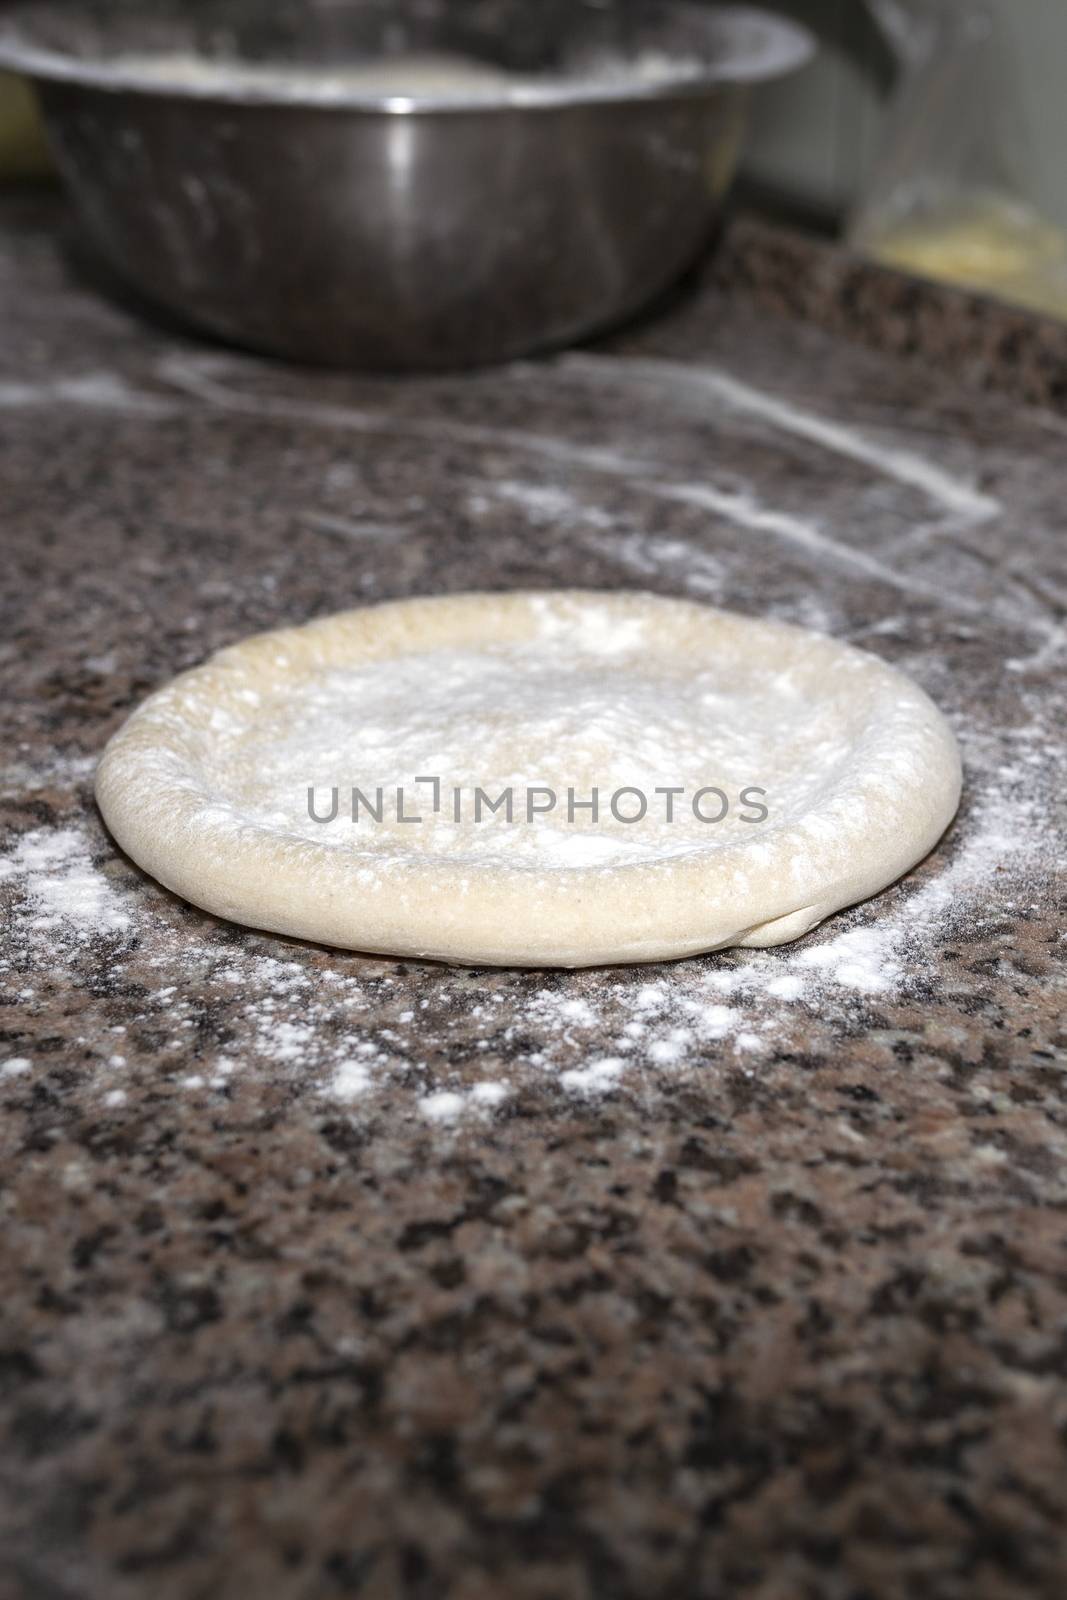 Rolled out pizza dough on floured slate surface, photographed overhead by 977_ReX_977